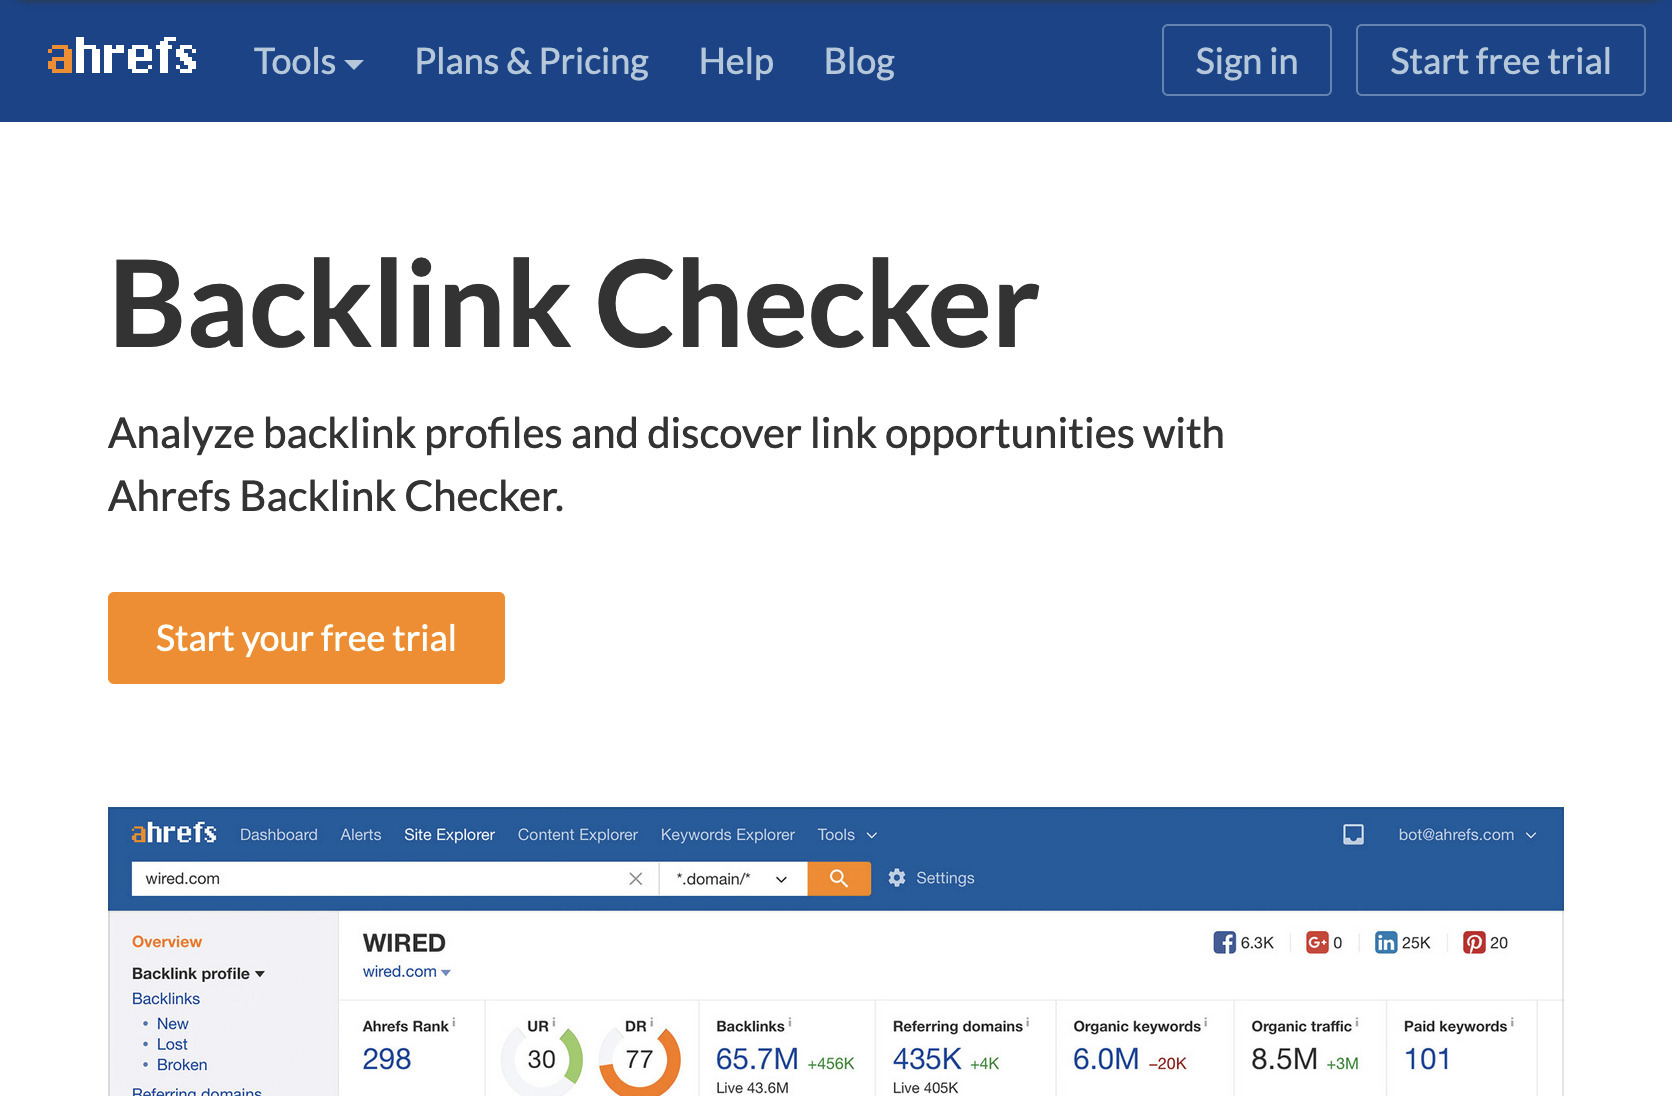 Our original landing page for our backlink checker